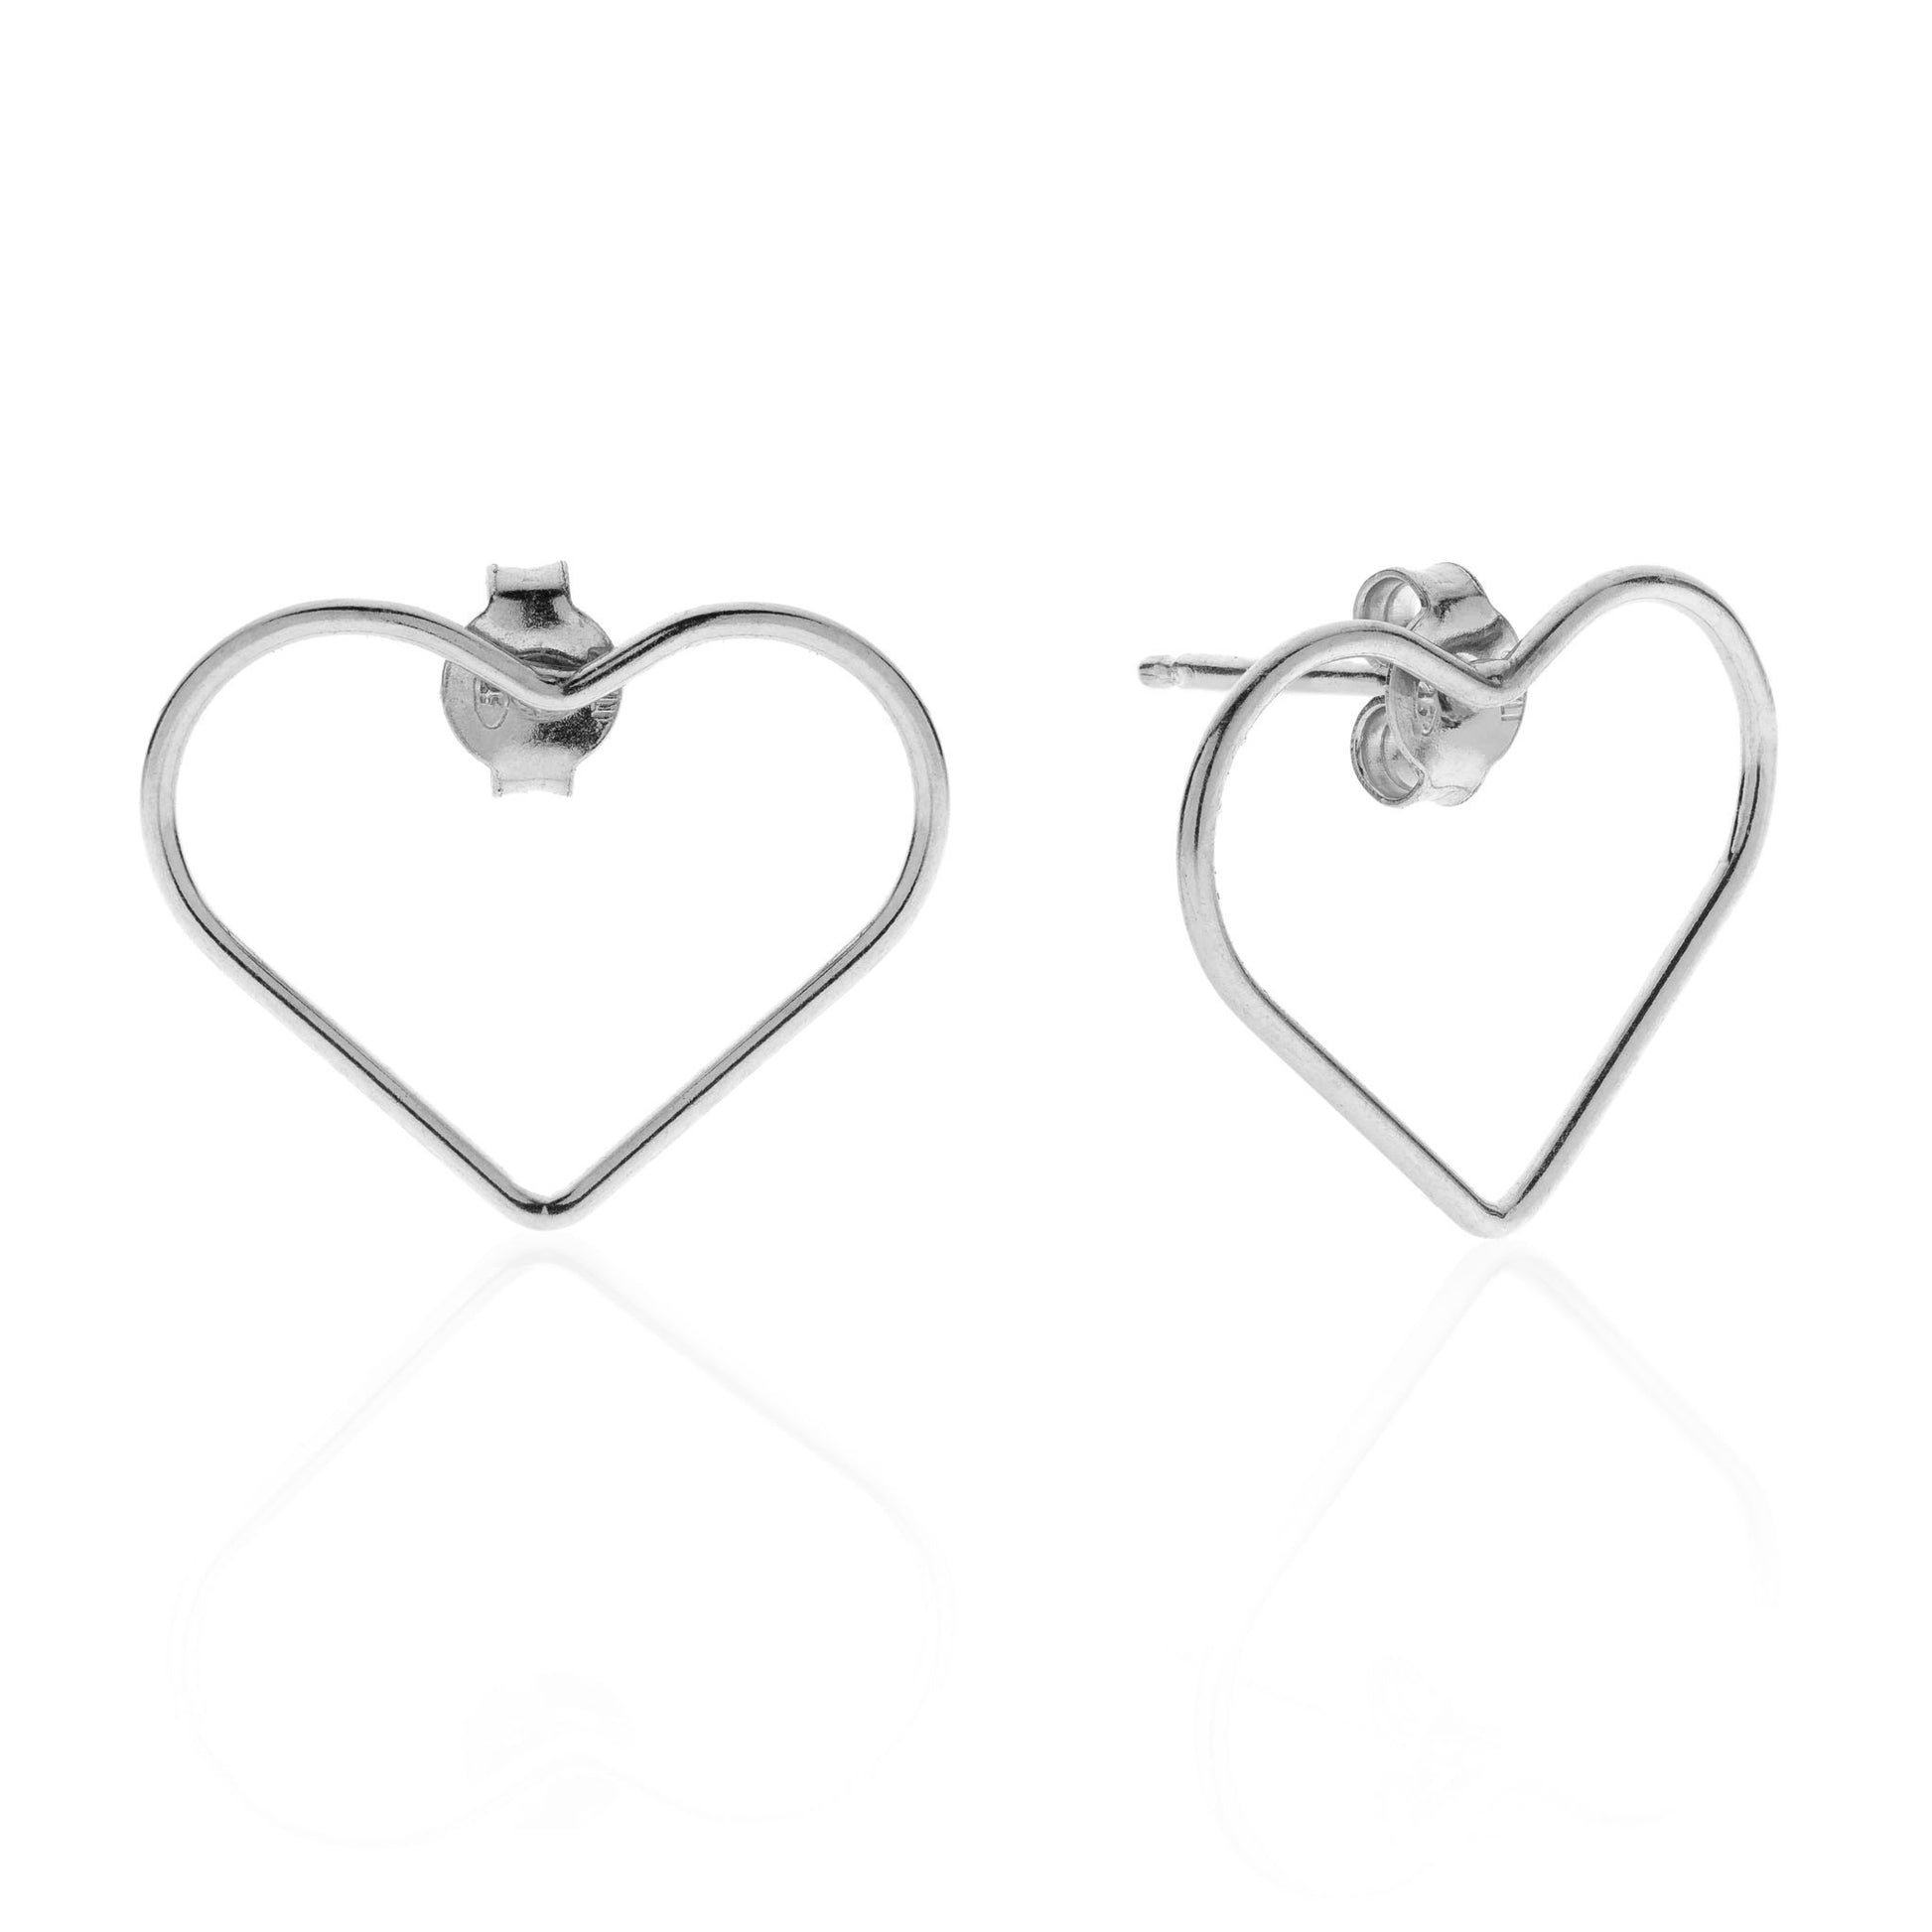 Heart PITAGORA sterling silver 925 earrings #MS045OR - MARIA SALVADOR